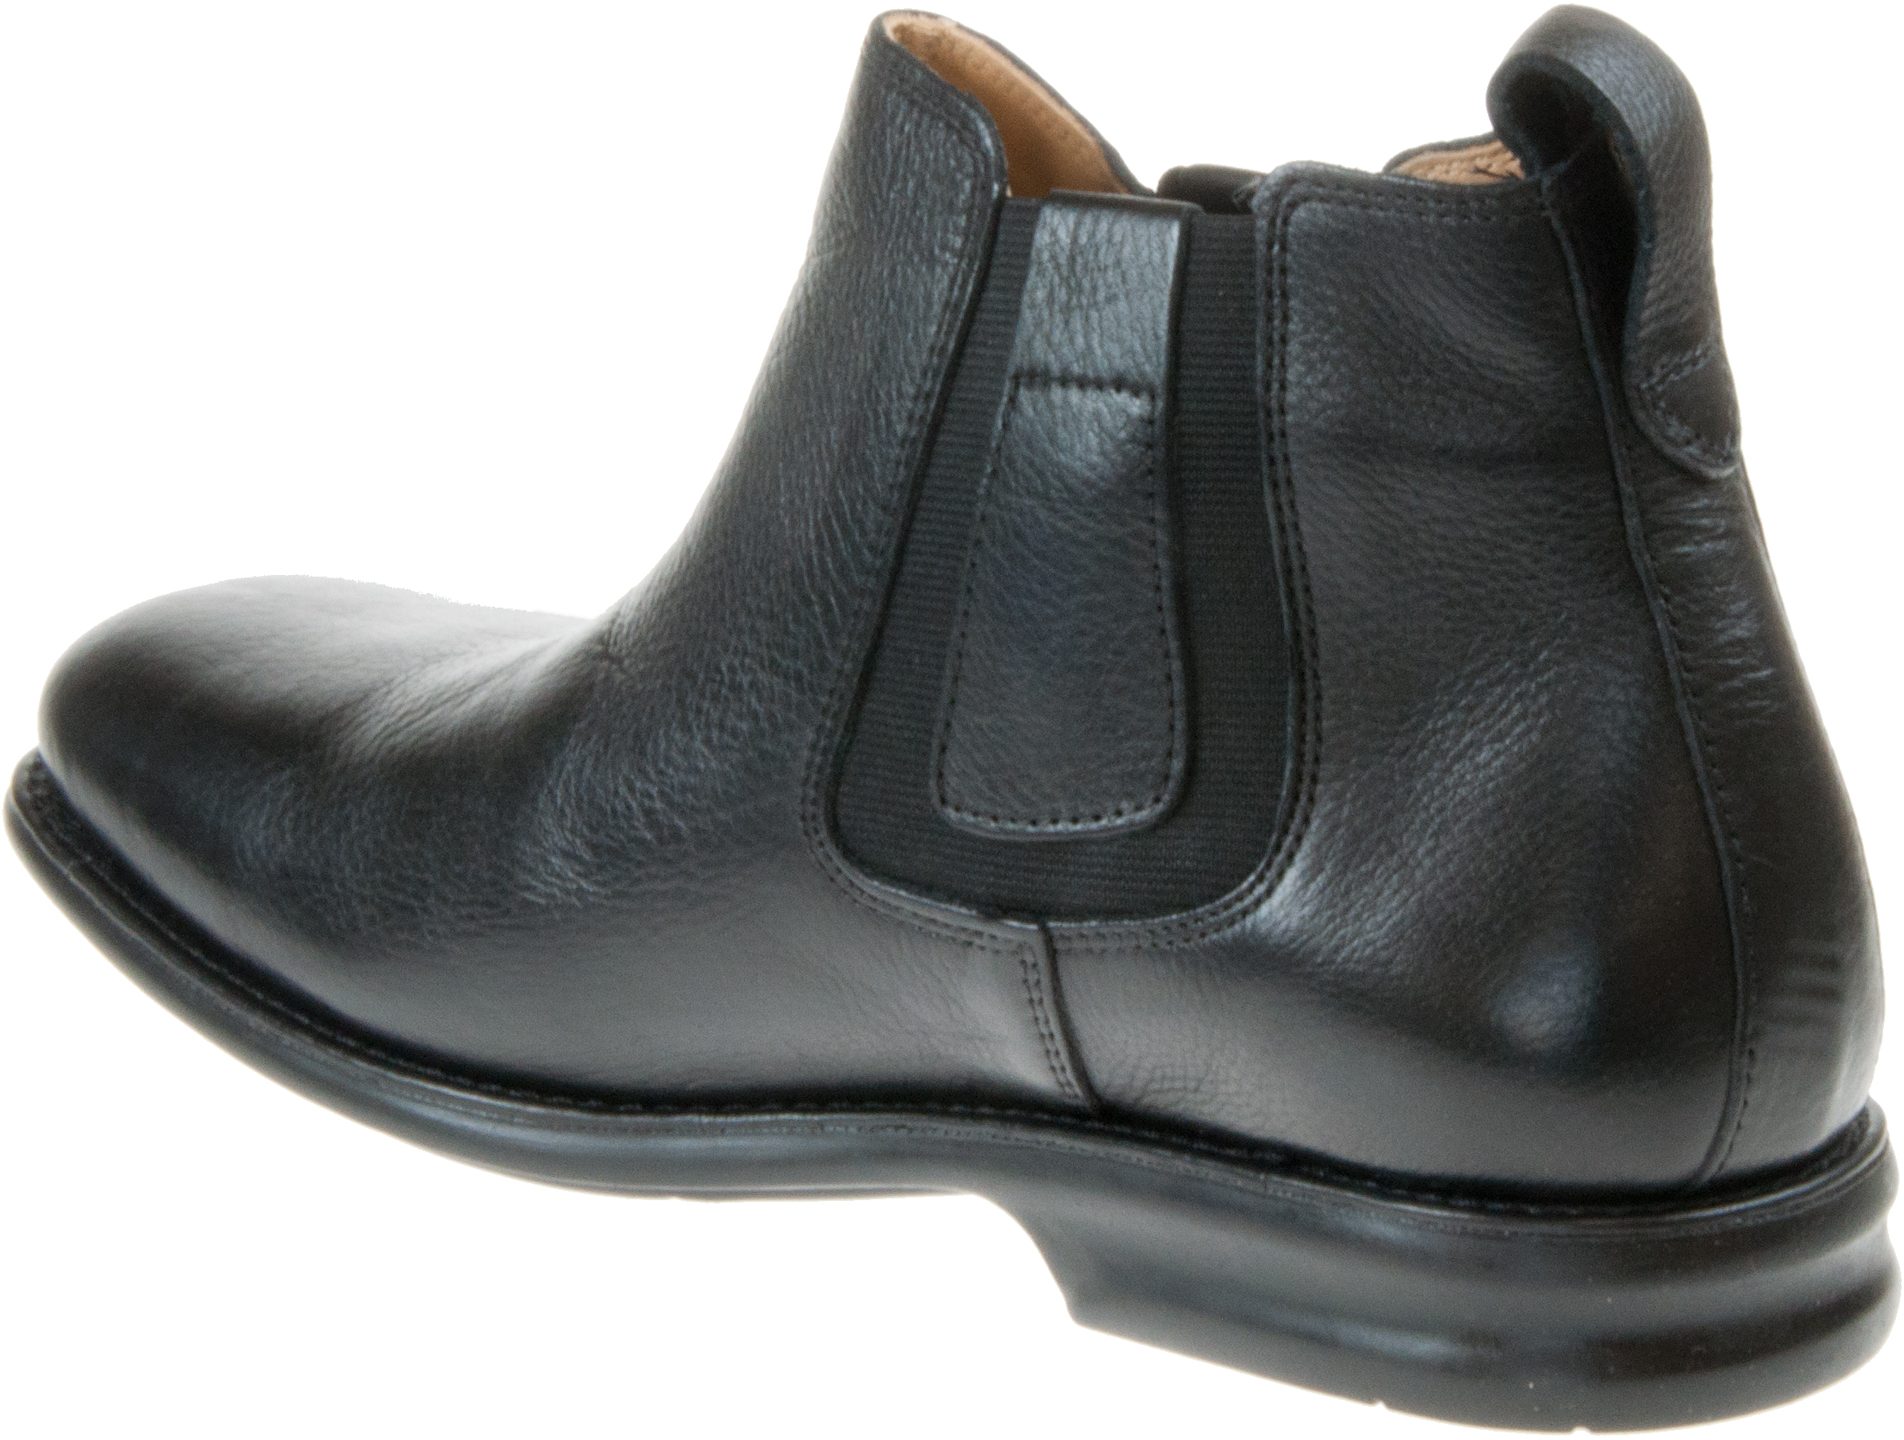 Anatomic & Co Amazonas Black 740353 - Formal Boots - Humphries Shoes